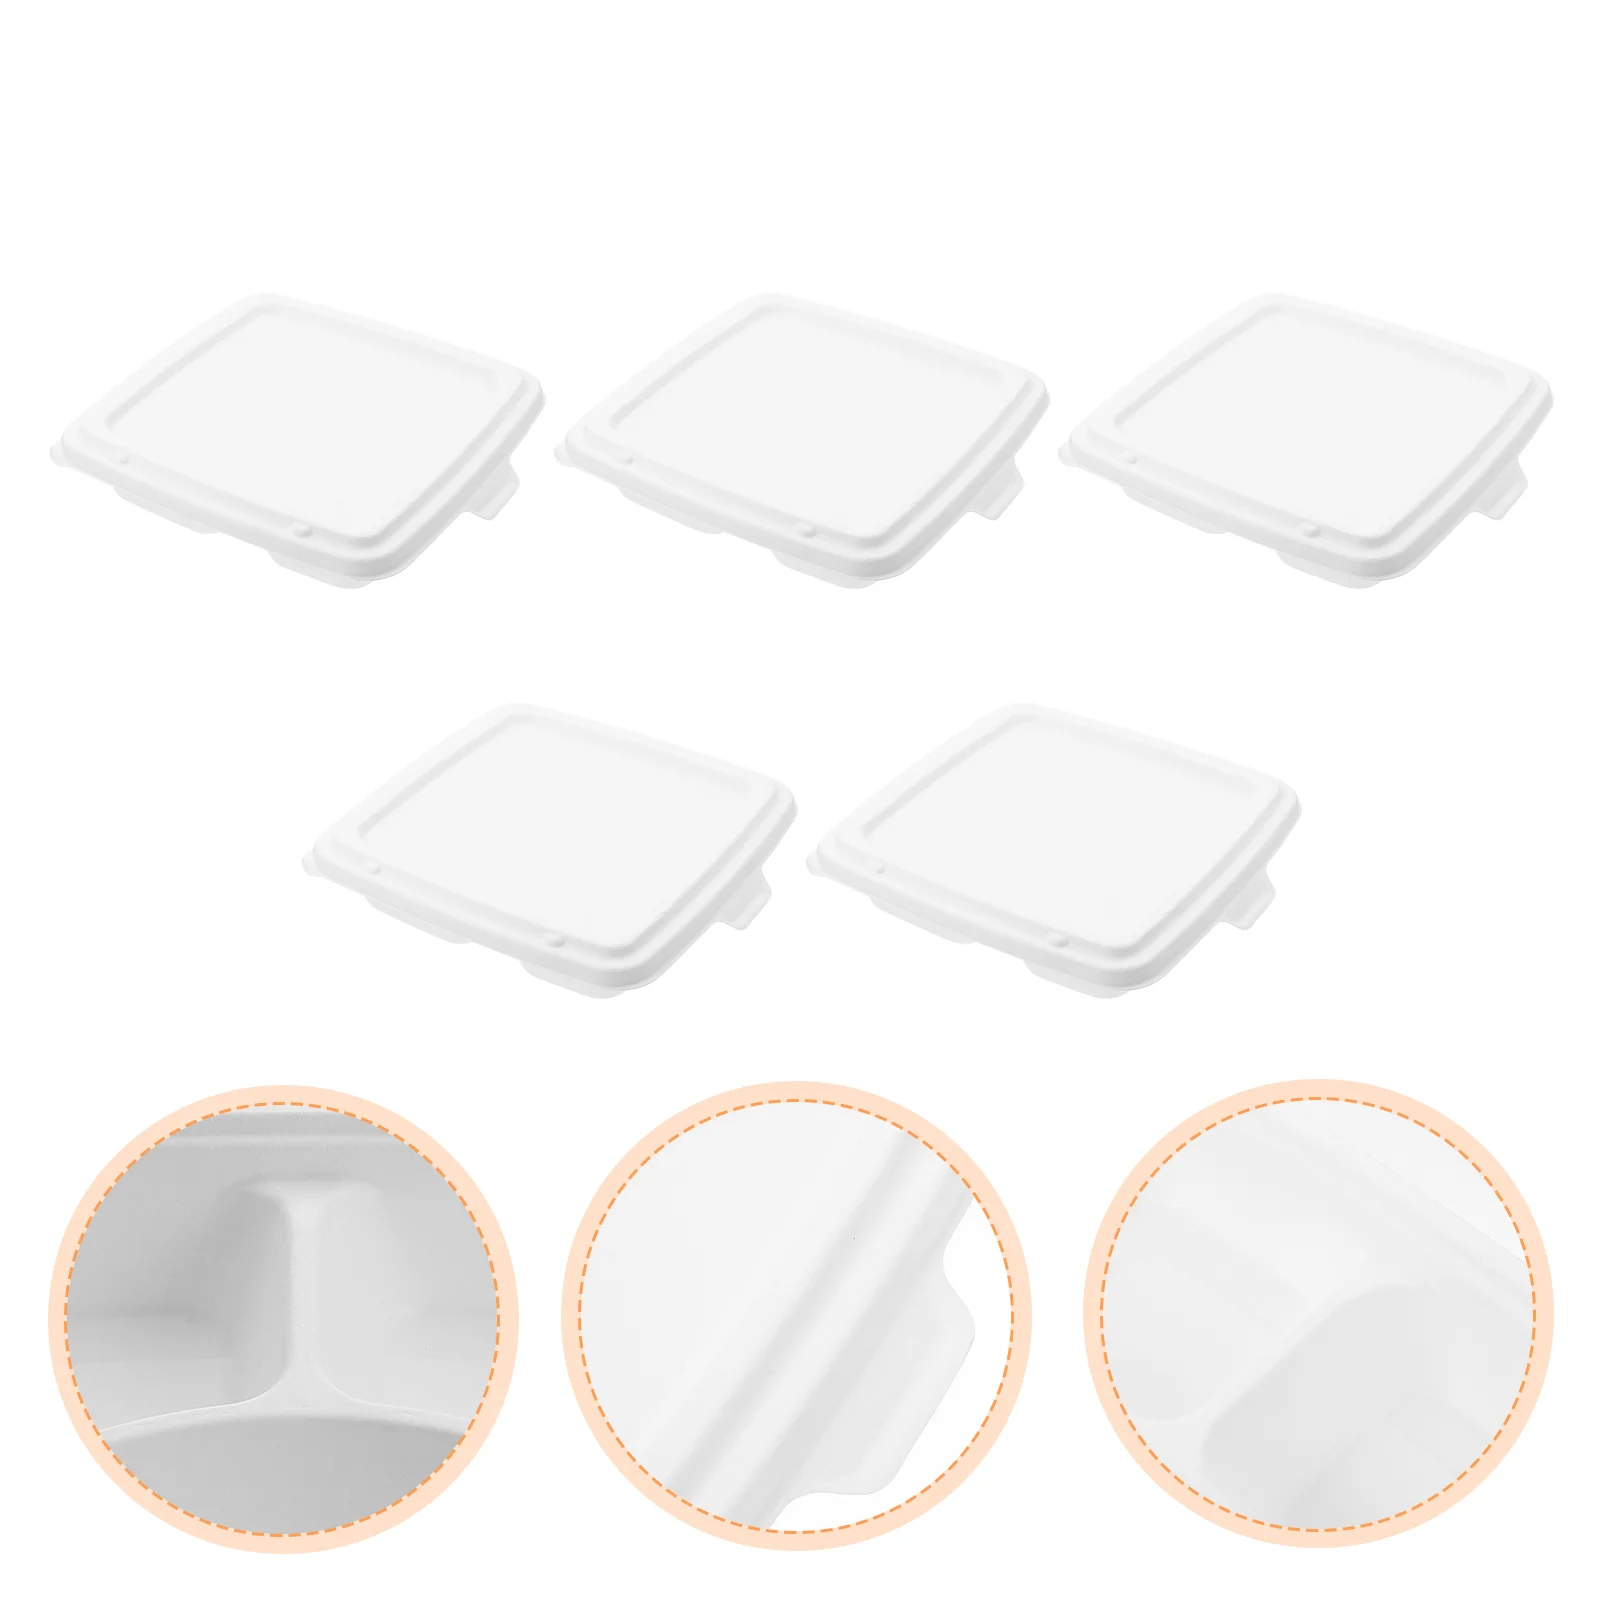 Boxclamshell Gocontainers Container Takeout Boxes Compartment Meal Prep Trays Dessert Paper Bento Cupcakelids Plate 3 Lunch Out